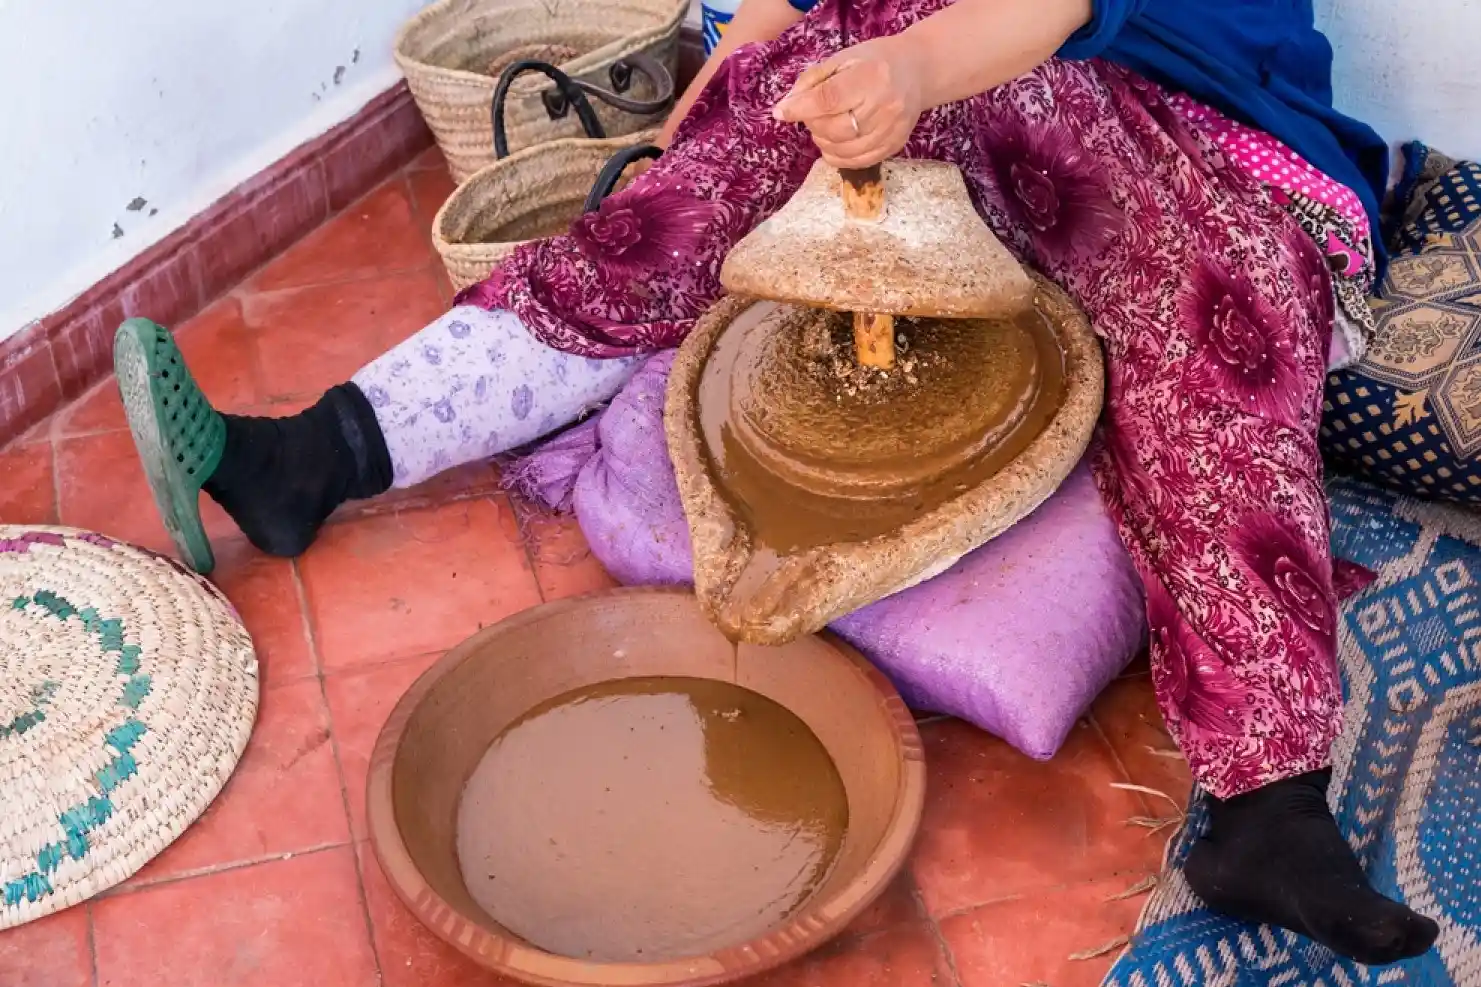 What-to-buy-in-morocco-and-how-much-to-pay-Argan-oil.webp